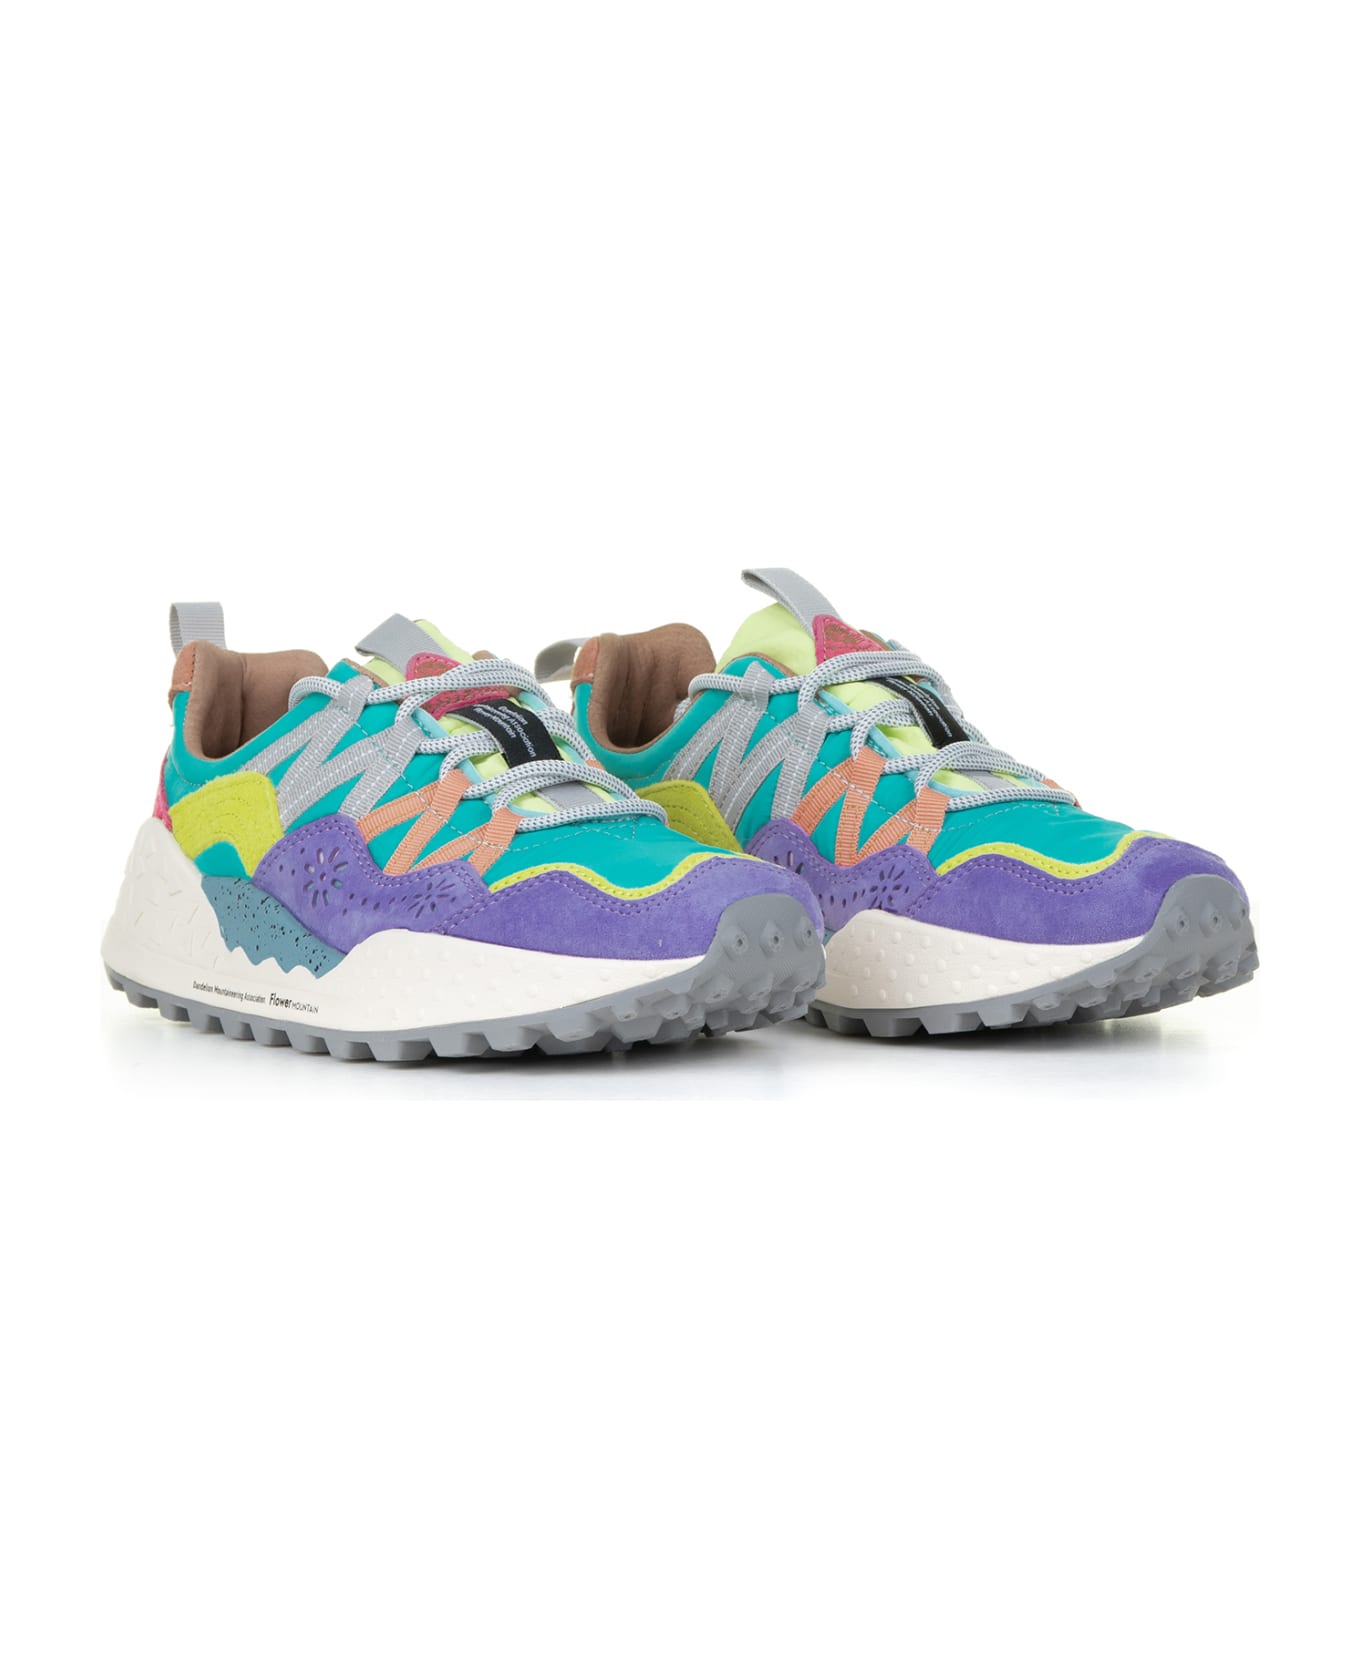 Flower Mountain Multicolored Washi Sneakers In Suede And Nylon - LILAC GREEN スニーカー